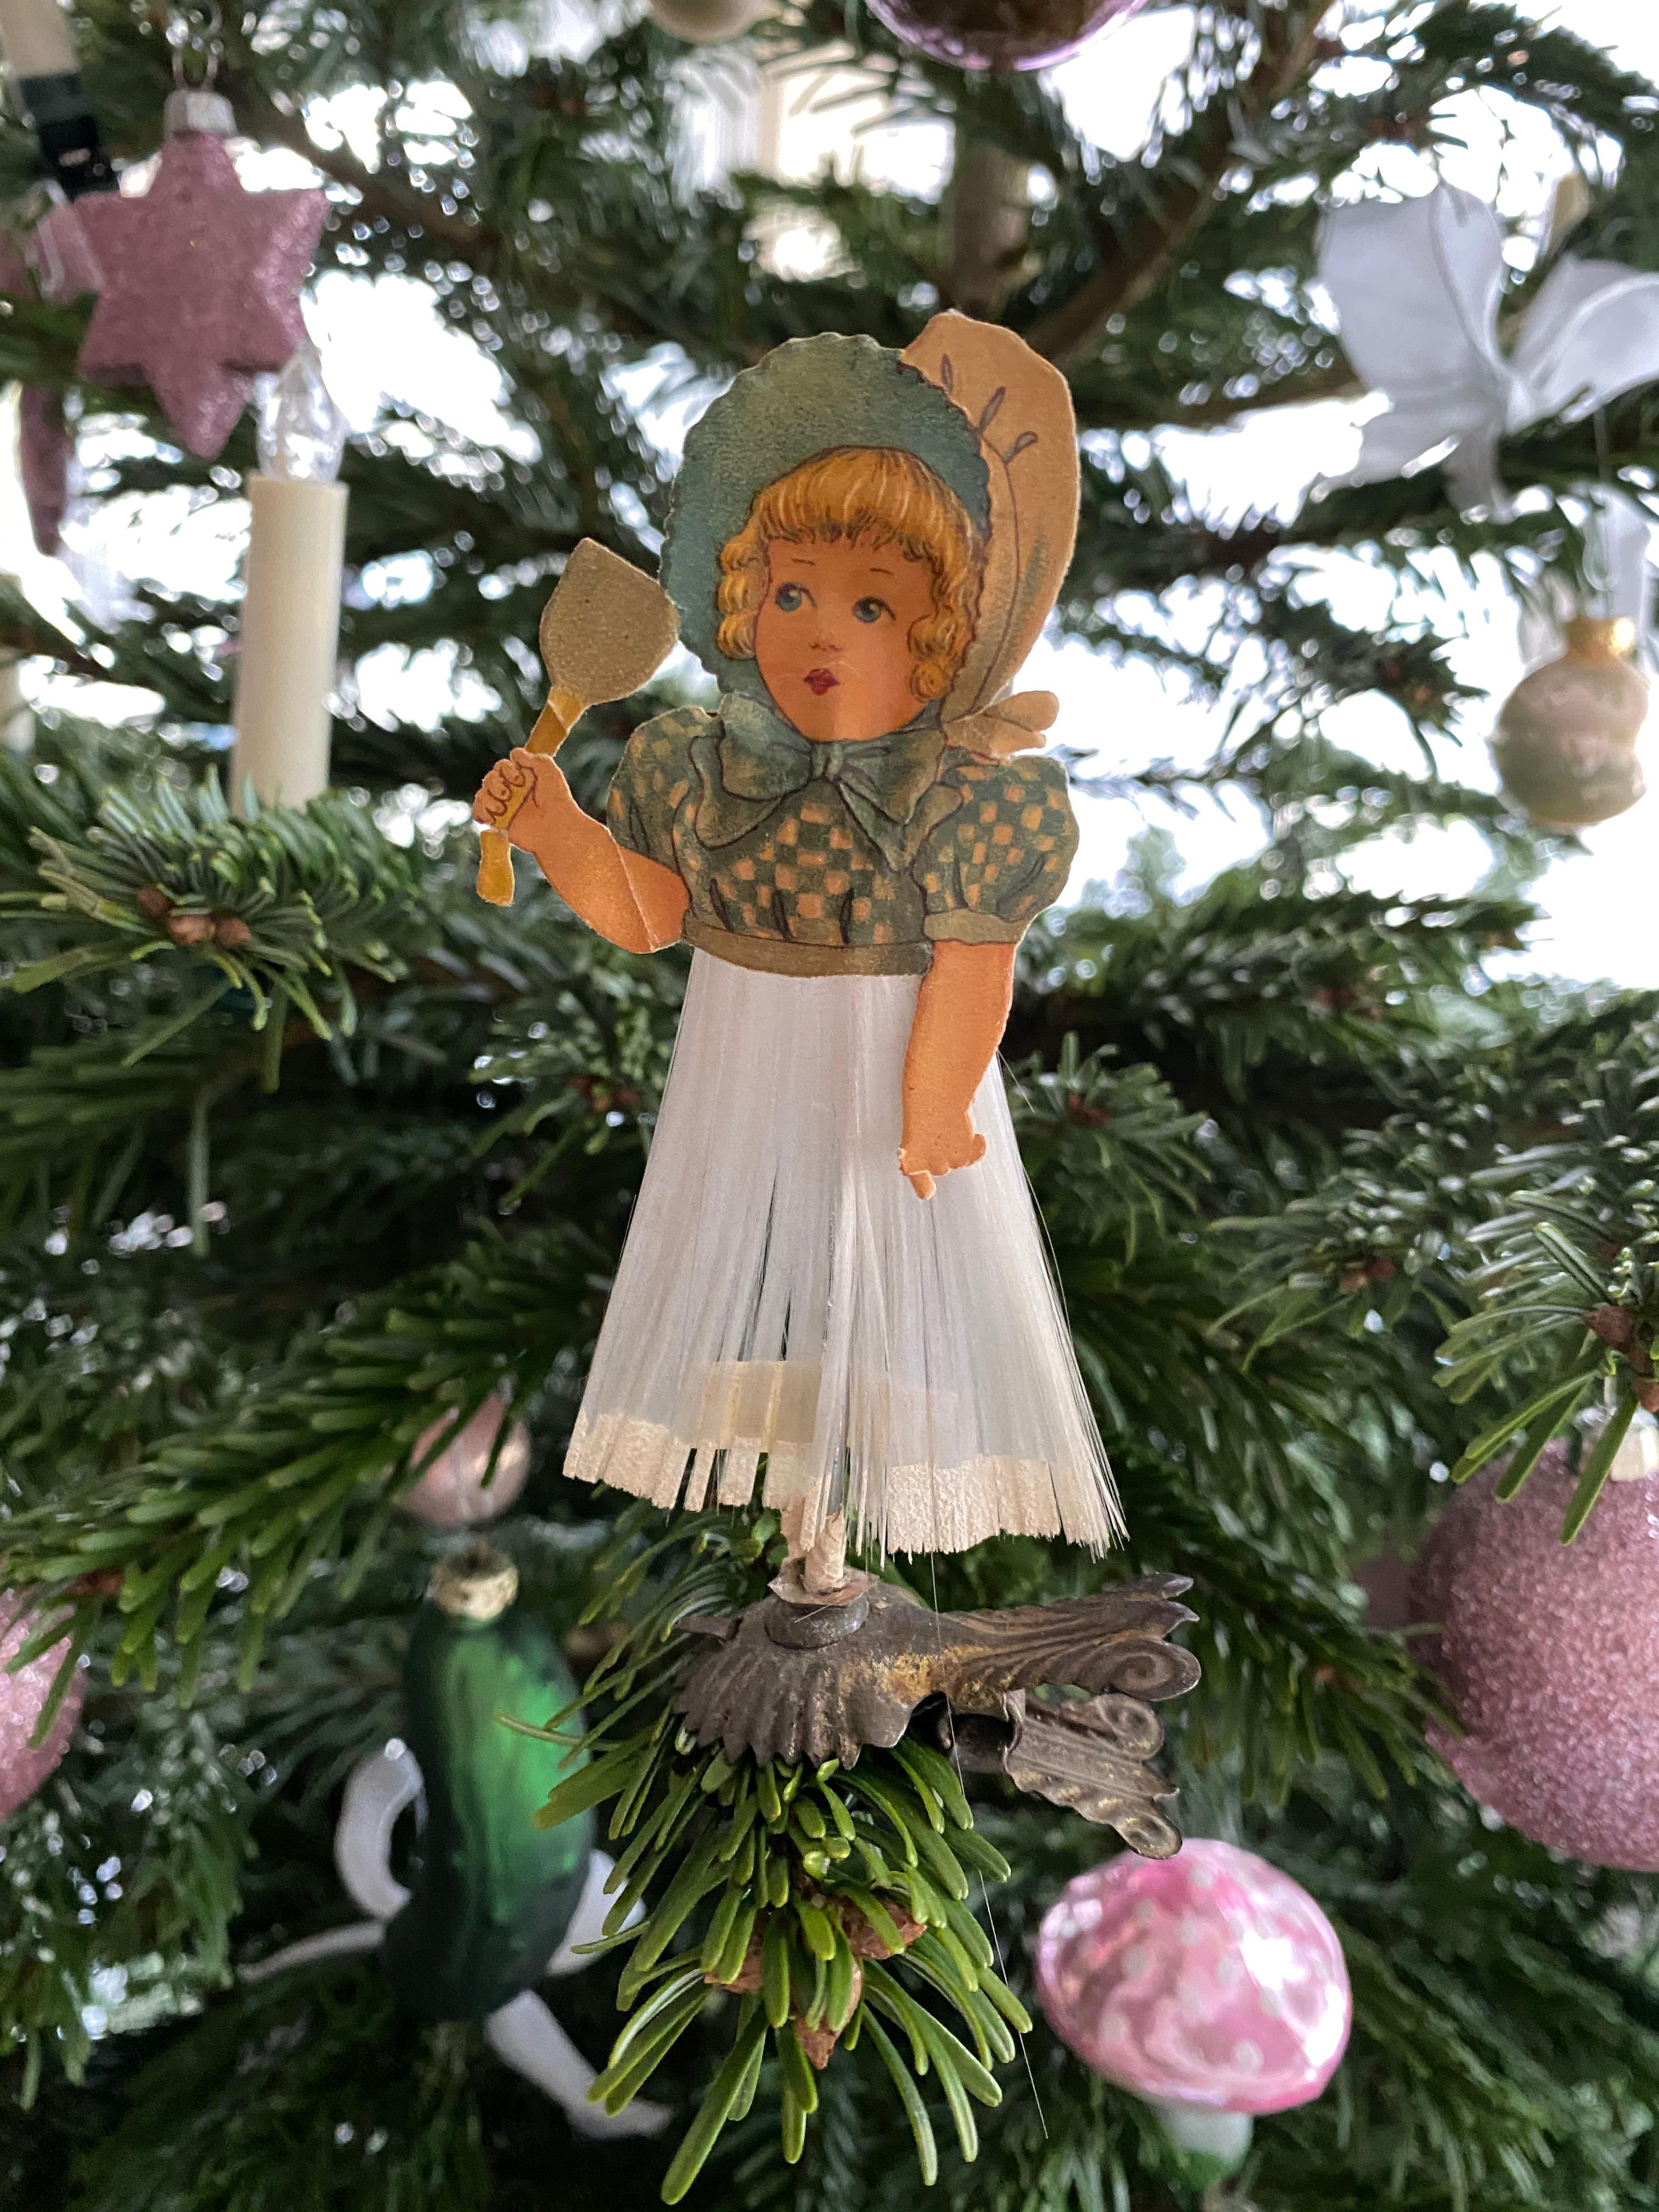 A rare antique clip-on ornament for your collection. This ornament, was made from a Victorian die cut paper scrap and spun glass, would be a great antique addition for your Christmas, feather tree or sitting on a decorative branch in your bathroom